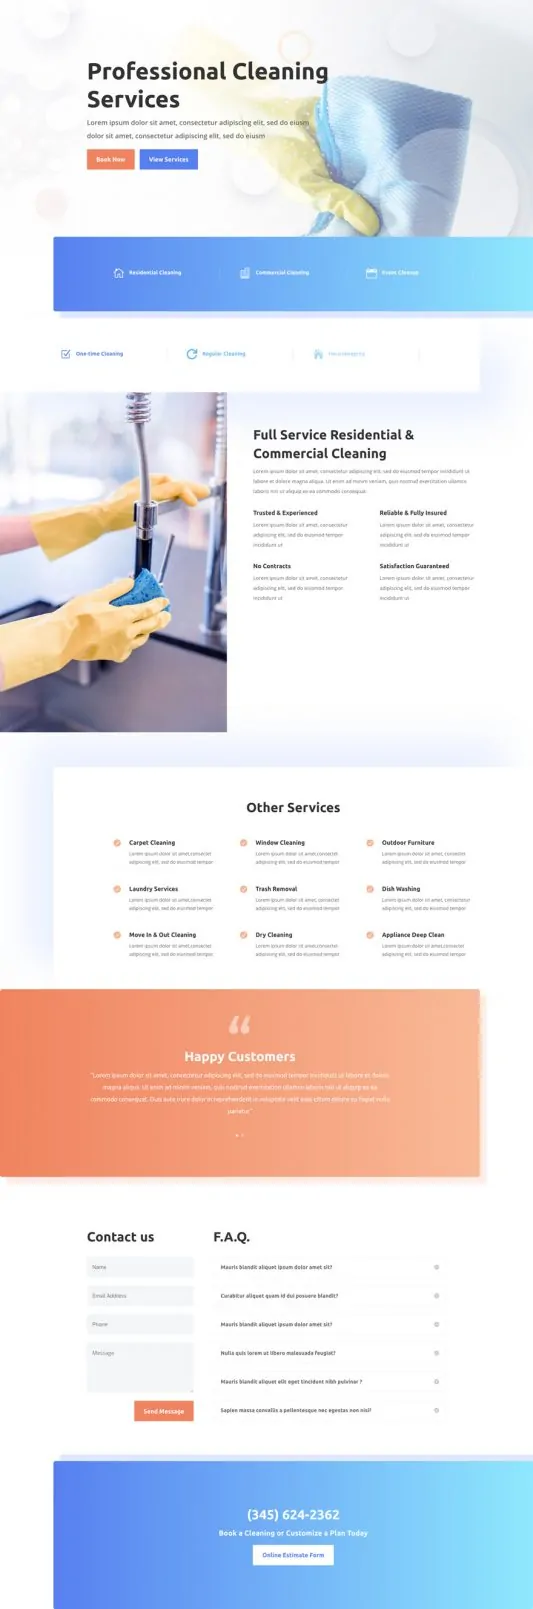 Cleaning Company Web Design 3